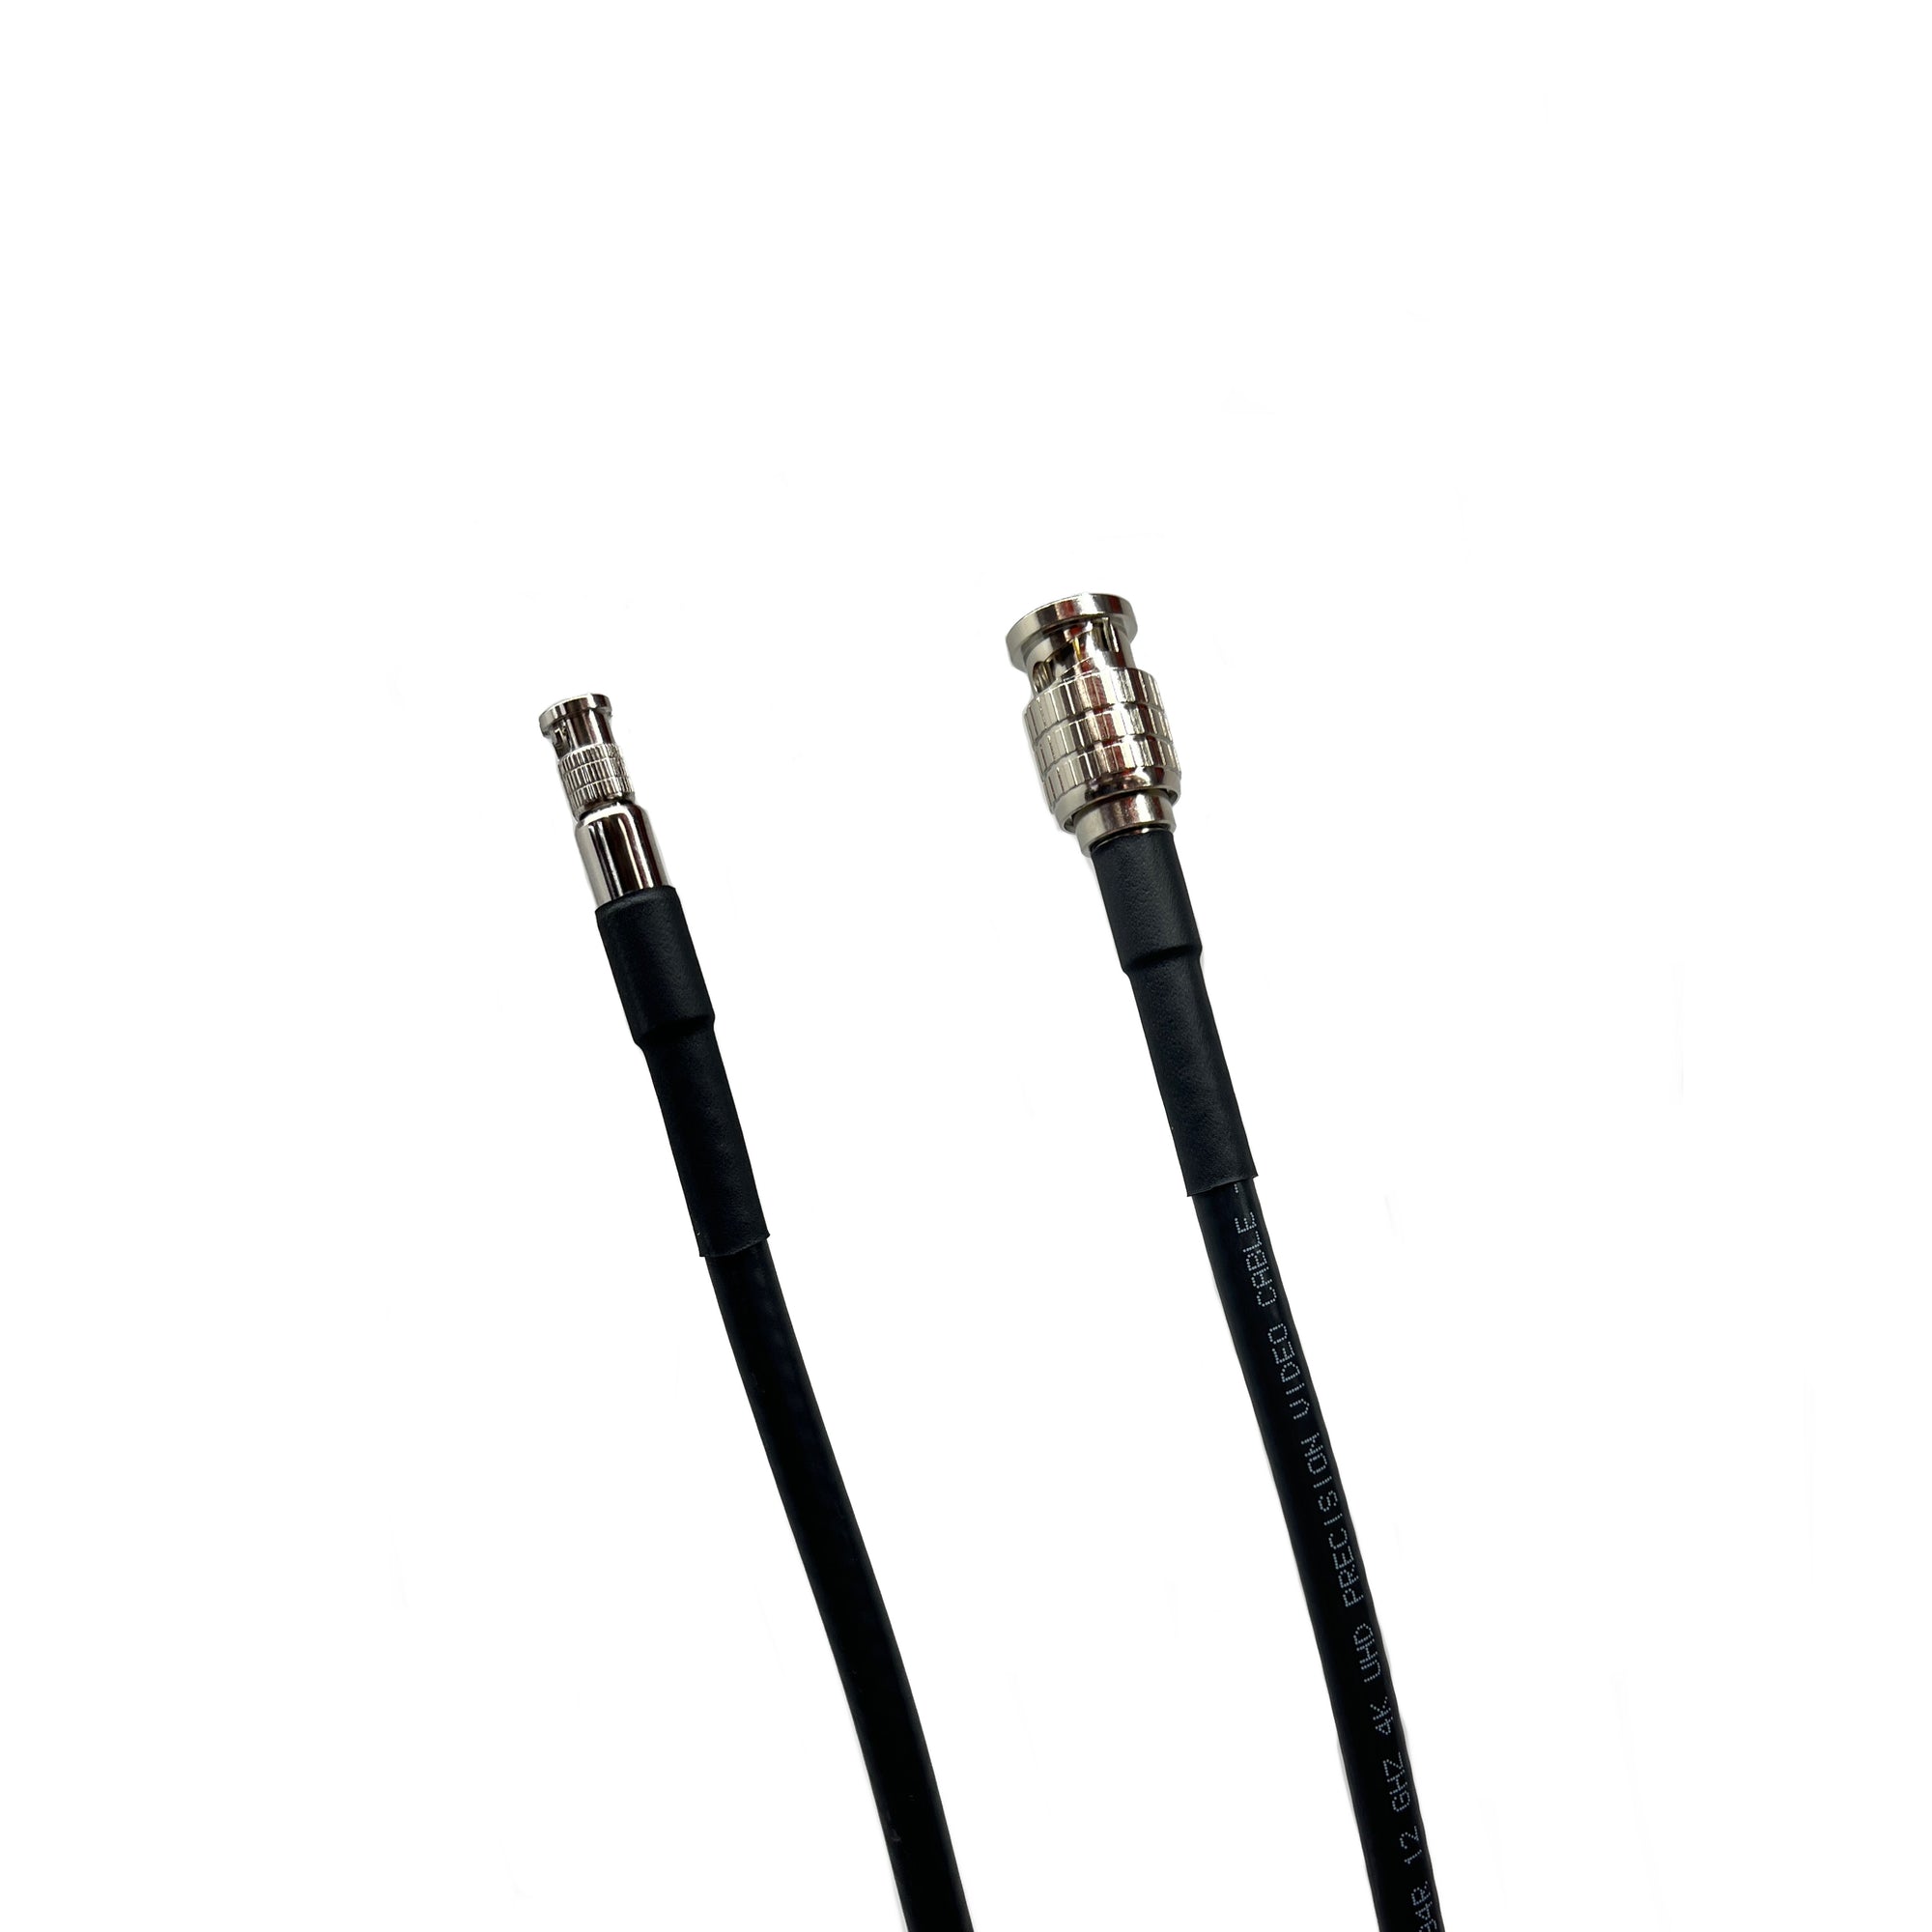 12G High Density BNC Male to BNC Male HD-SDI Cable with Belden 4694R